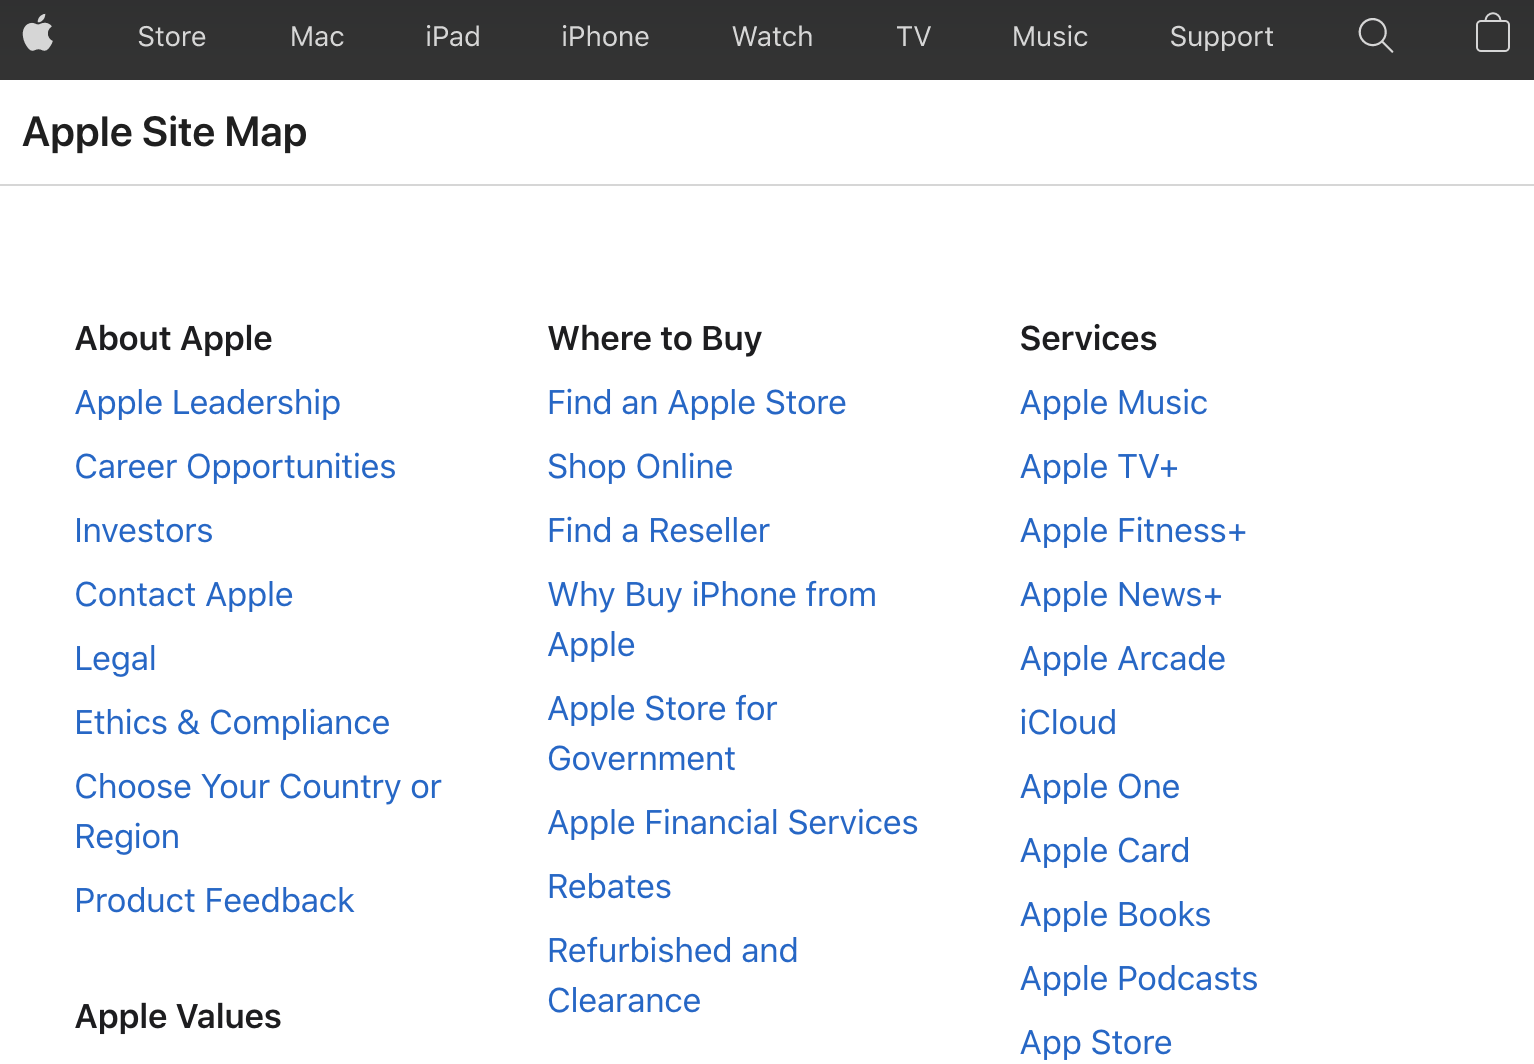 Site map of apple.com, showing the main content areas with links to pages and topics.